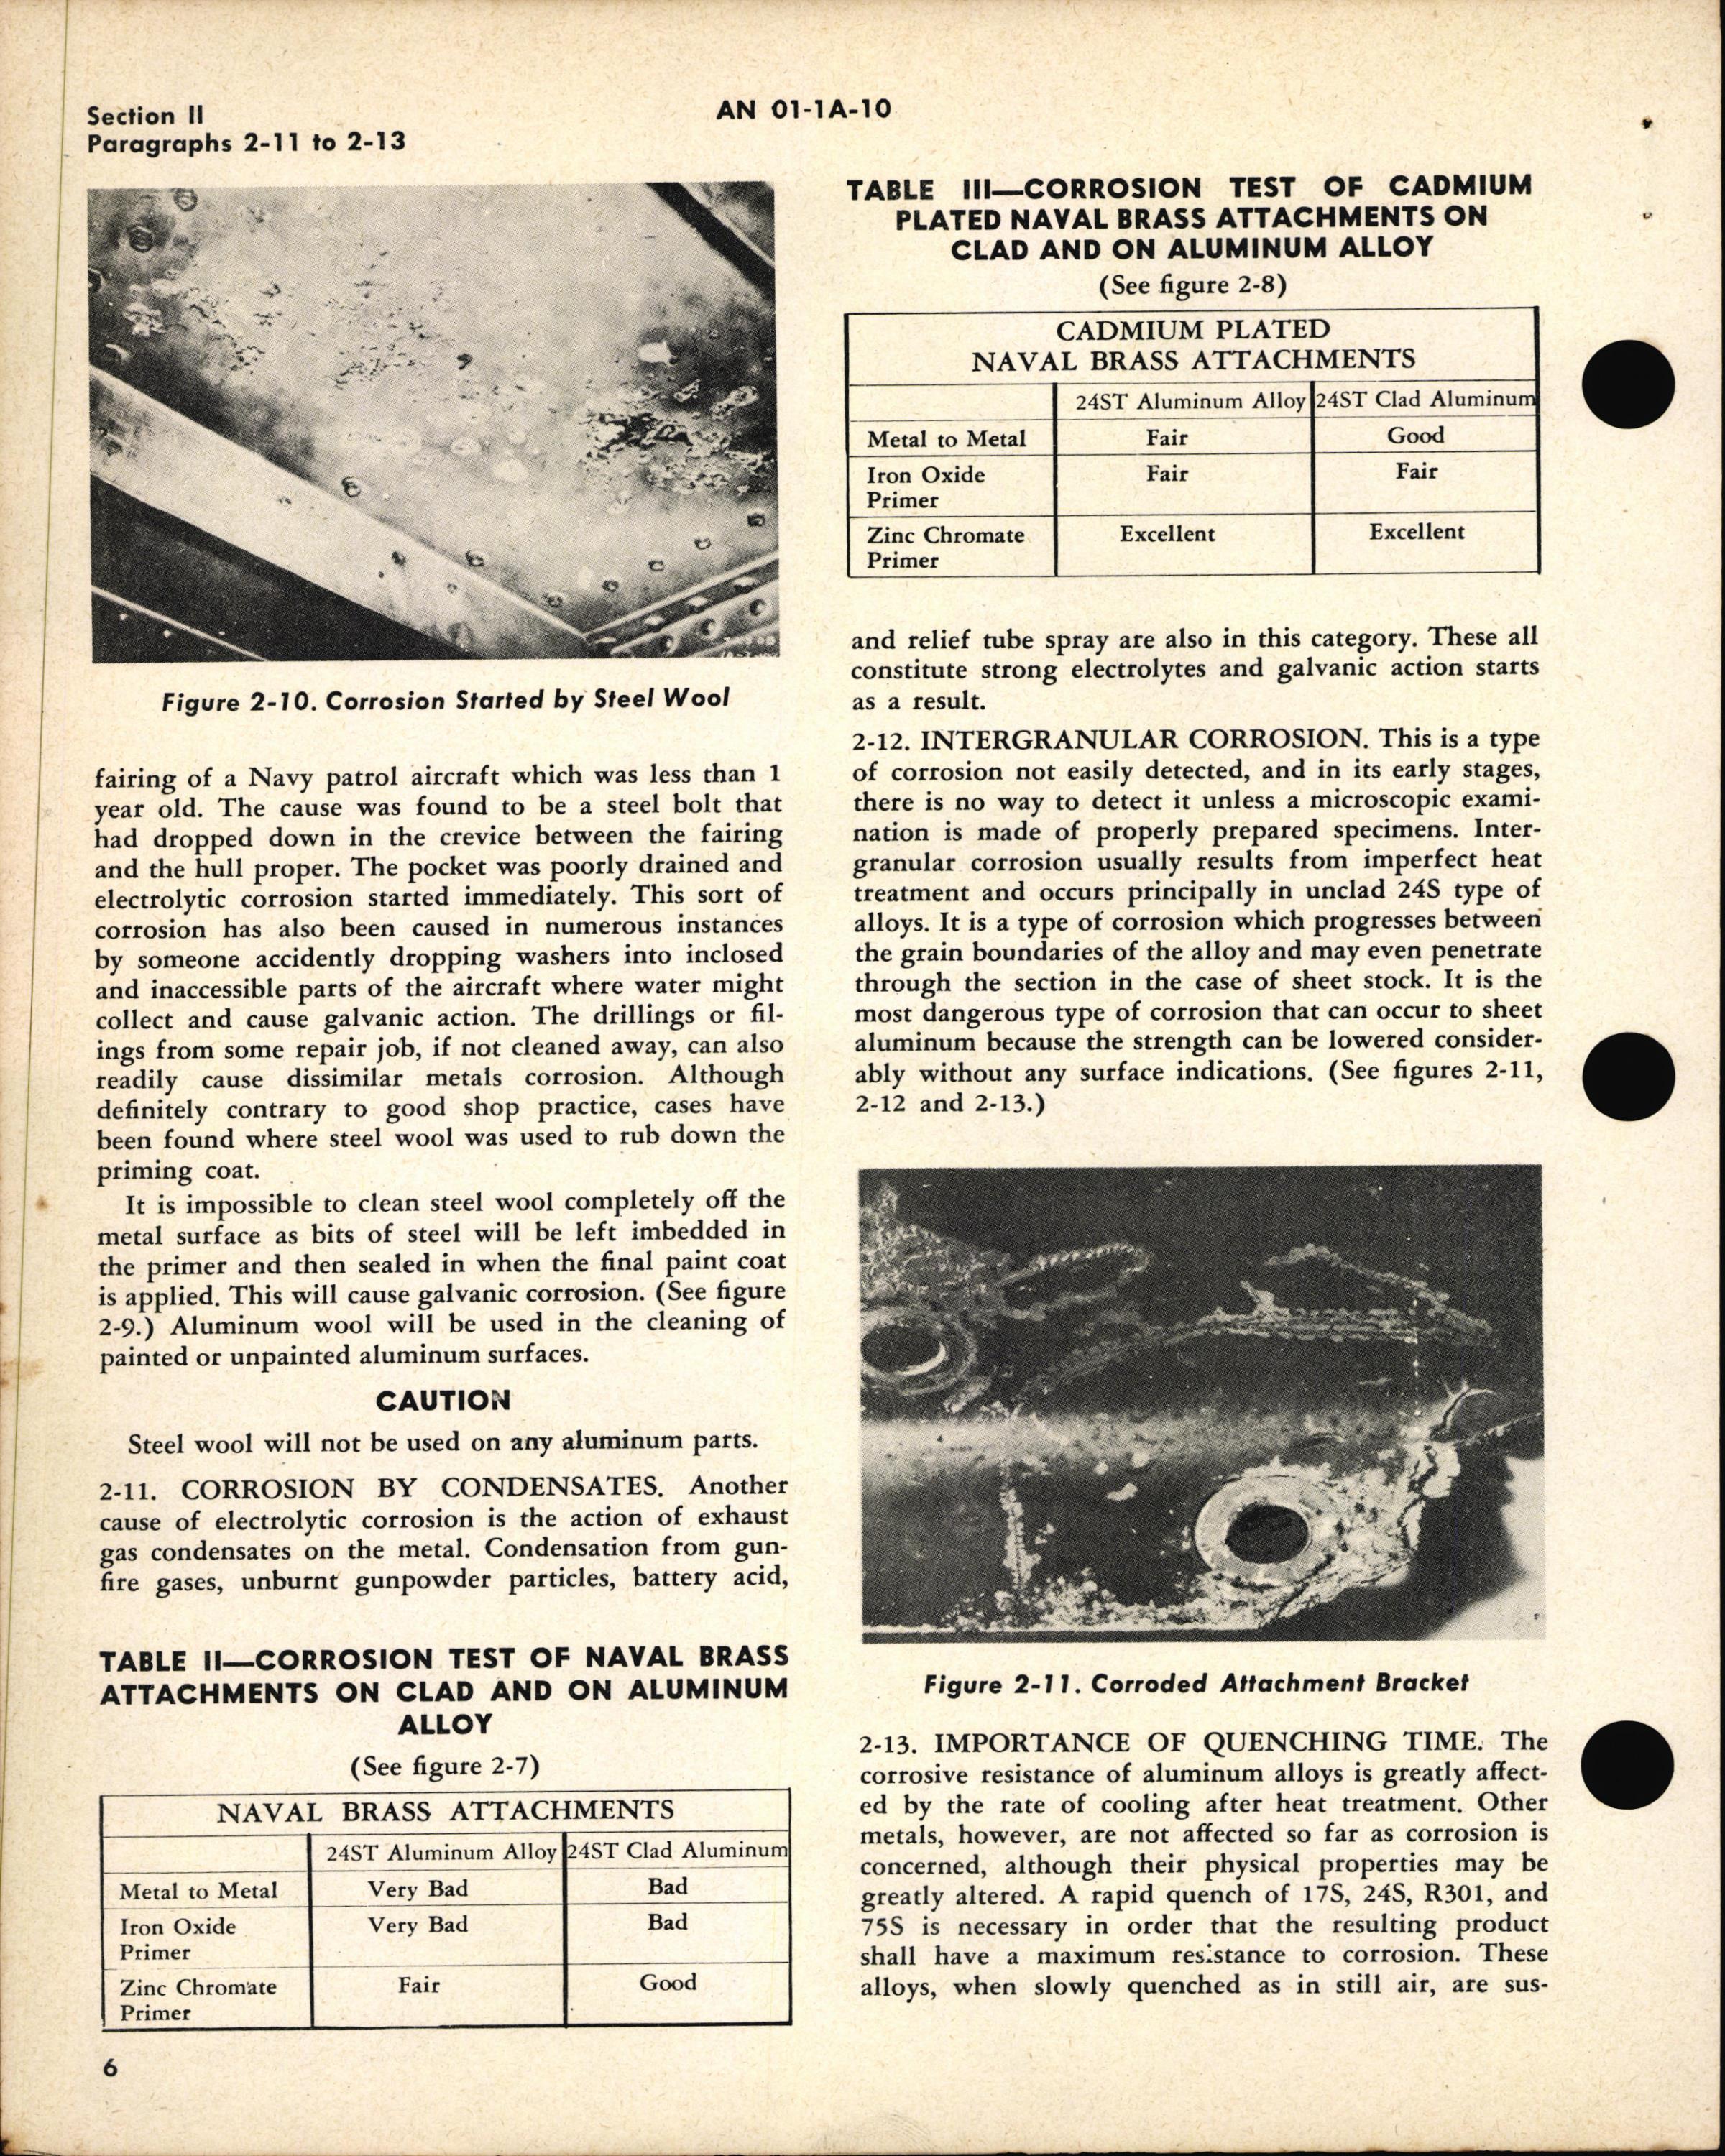 Sample page 10 from AirCorps Library document: Corrosion Control for Aircraft